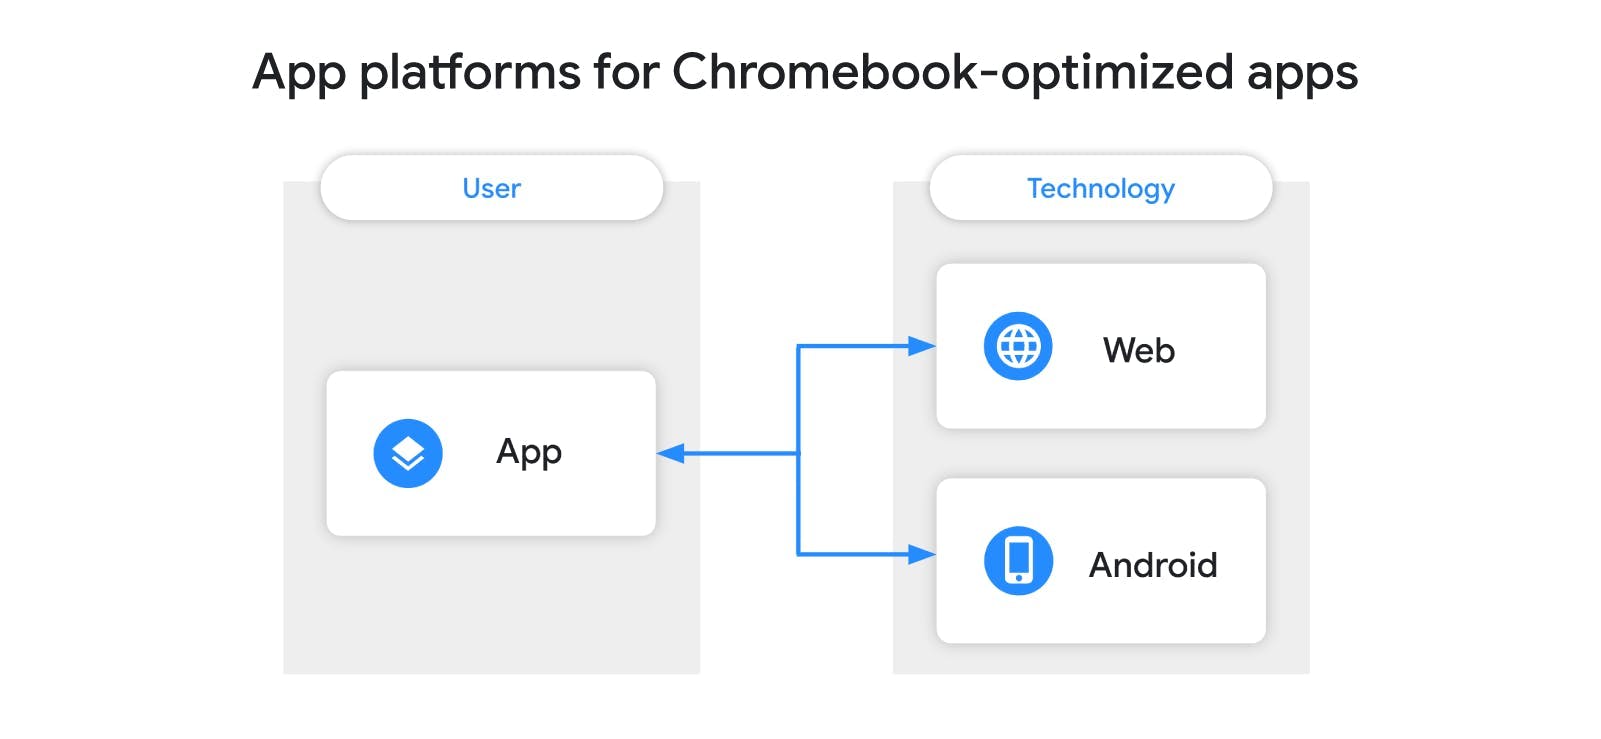 A chart of app platforms for building Chromebook-optimized apps. Devs can use the web and Android to build apps and games optimized for Chromebook users.